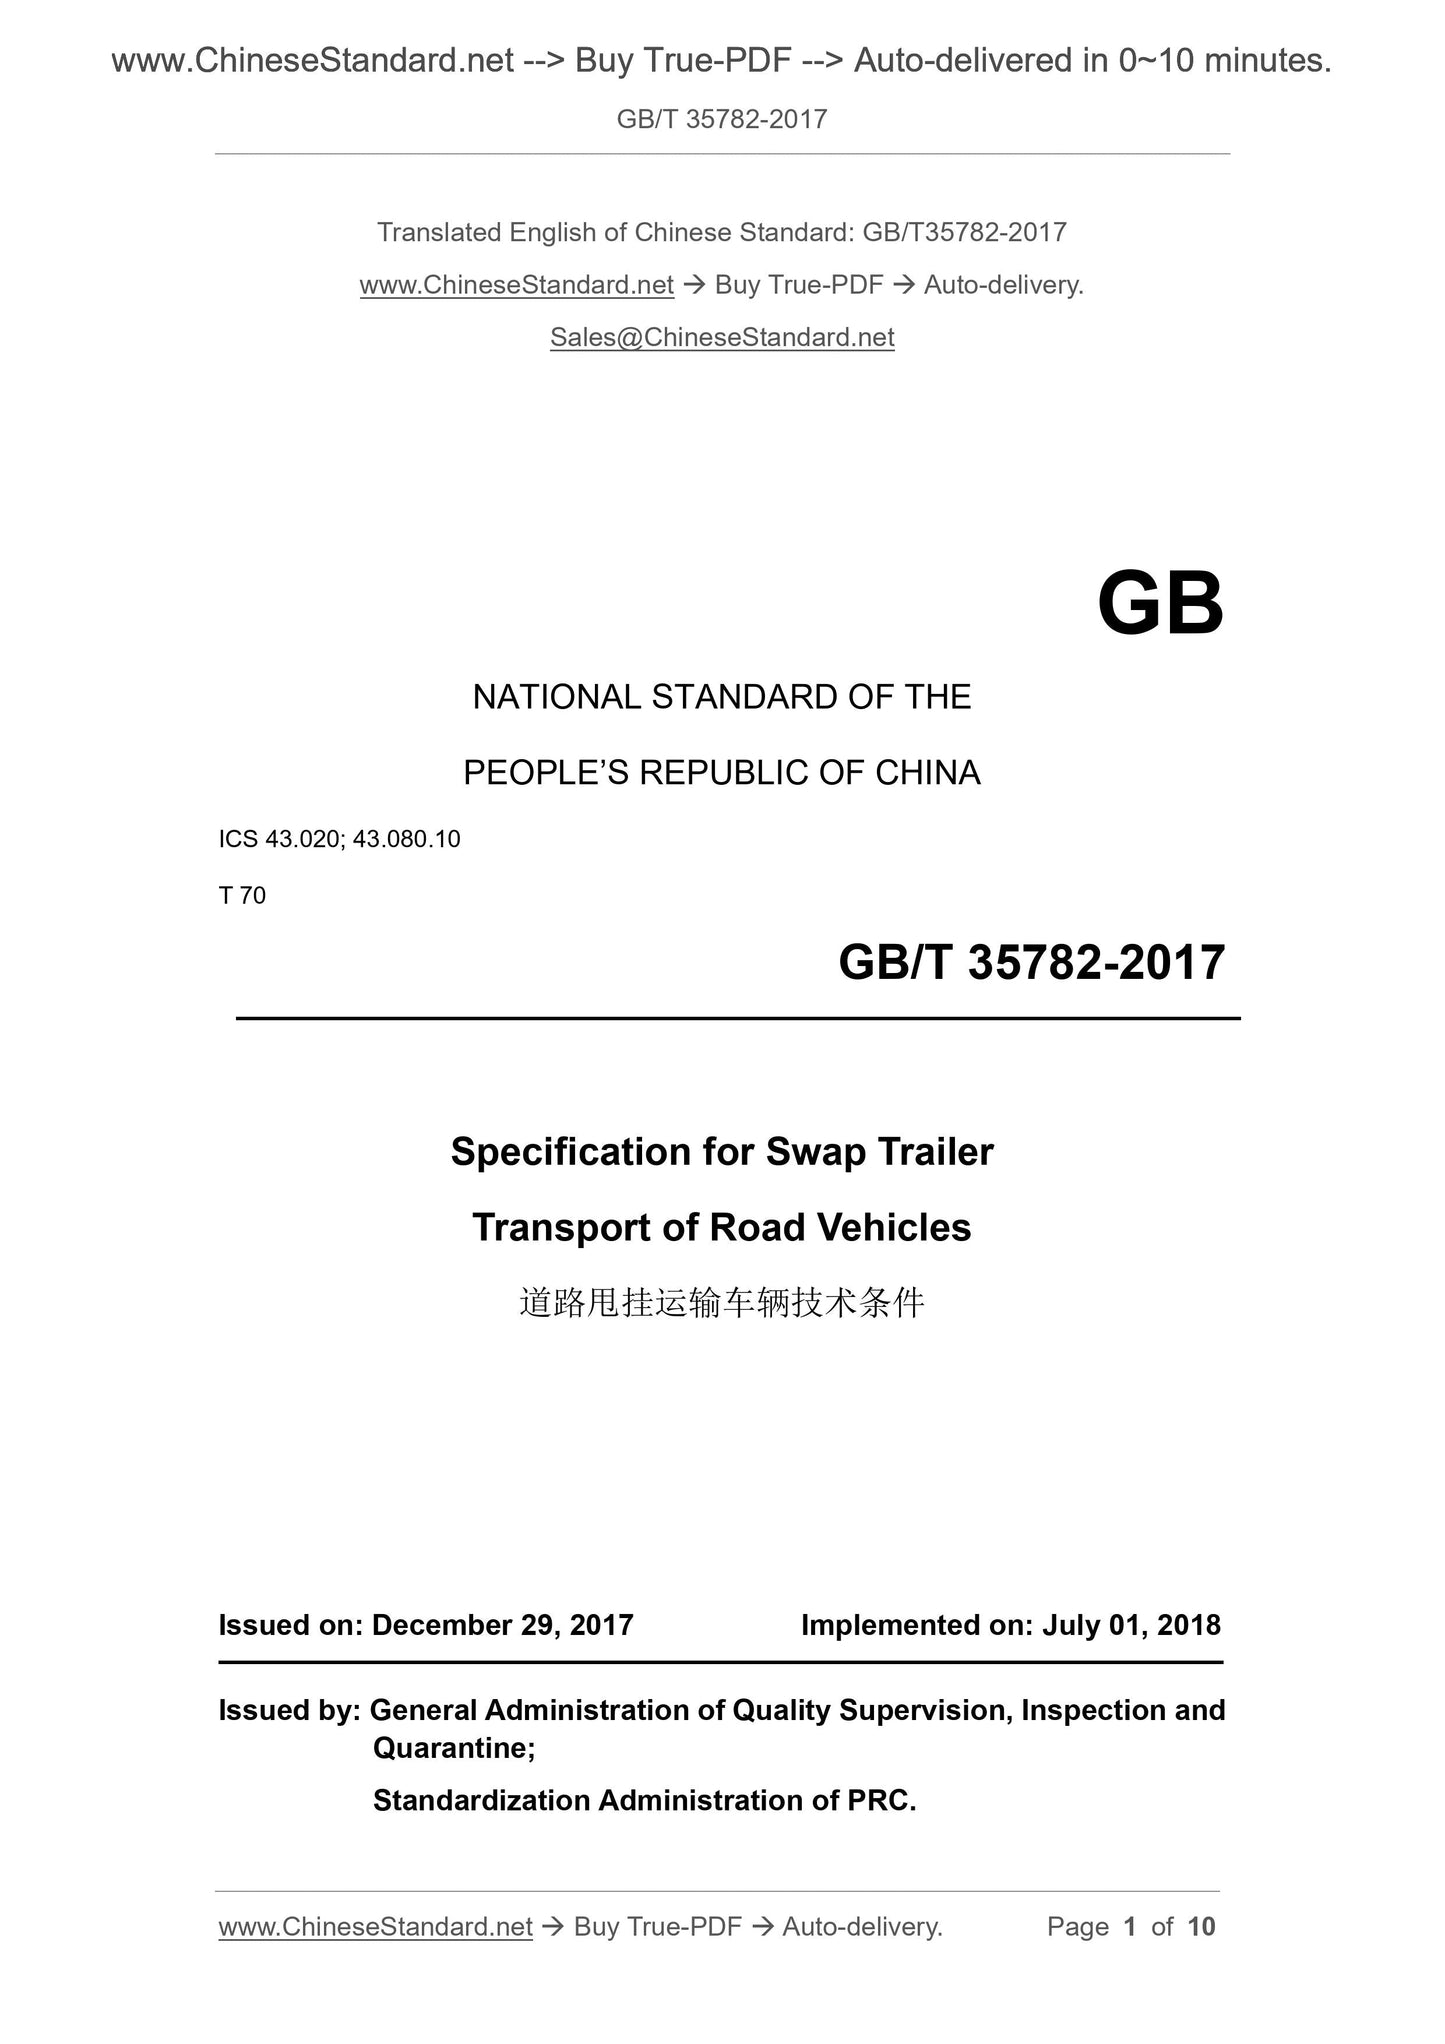 GB/T 35782-2017 Page 1